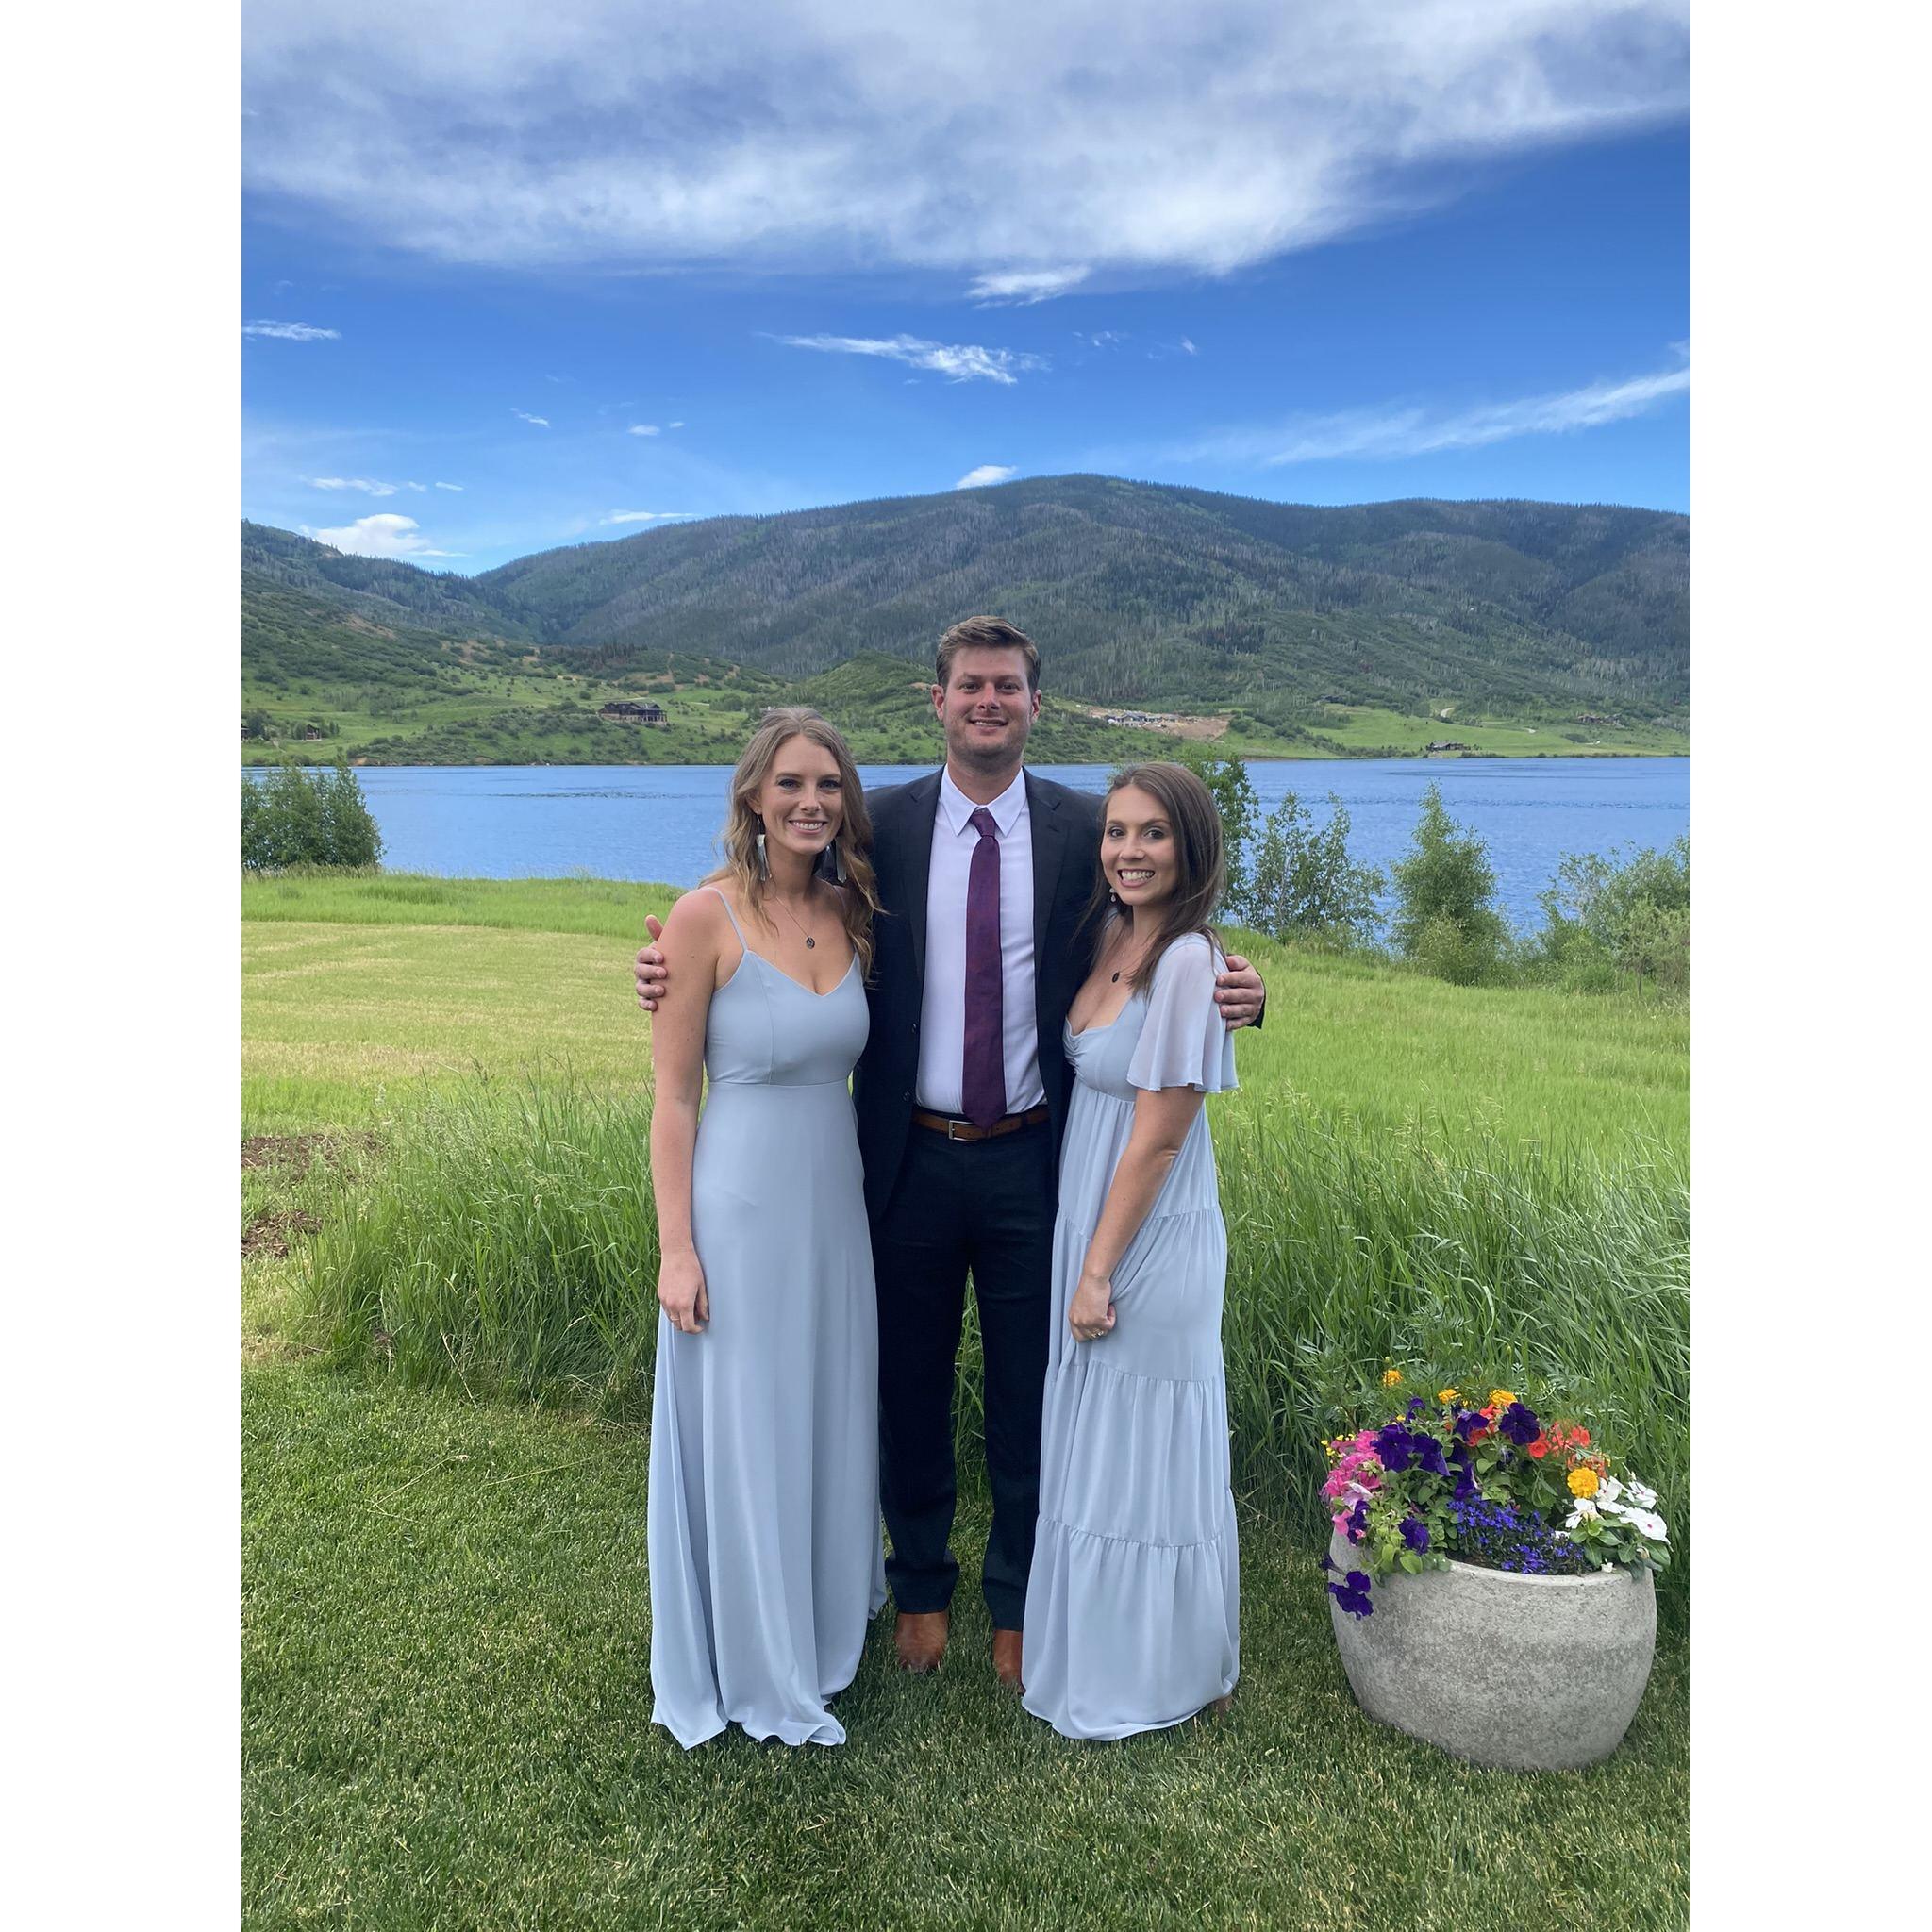 Dana and Sean's Wedding in Steamboat Springs, CO with Annie (2022)